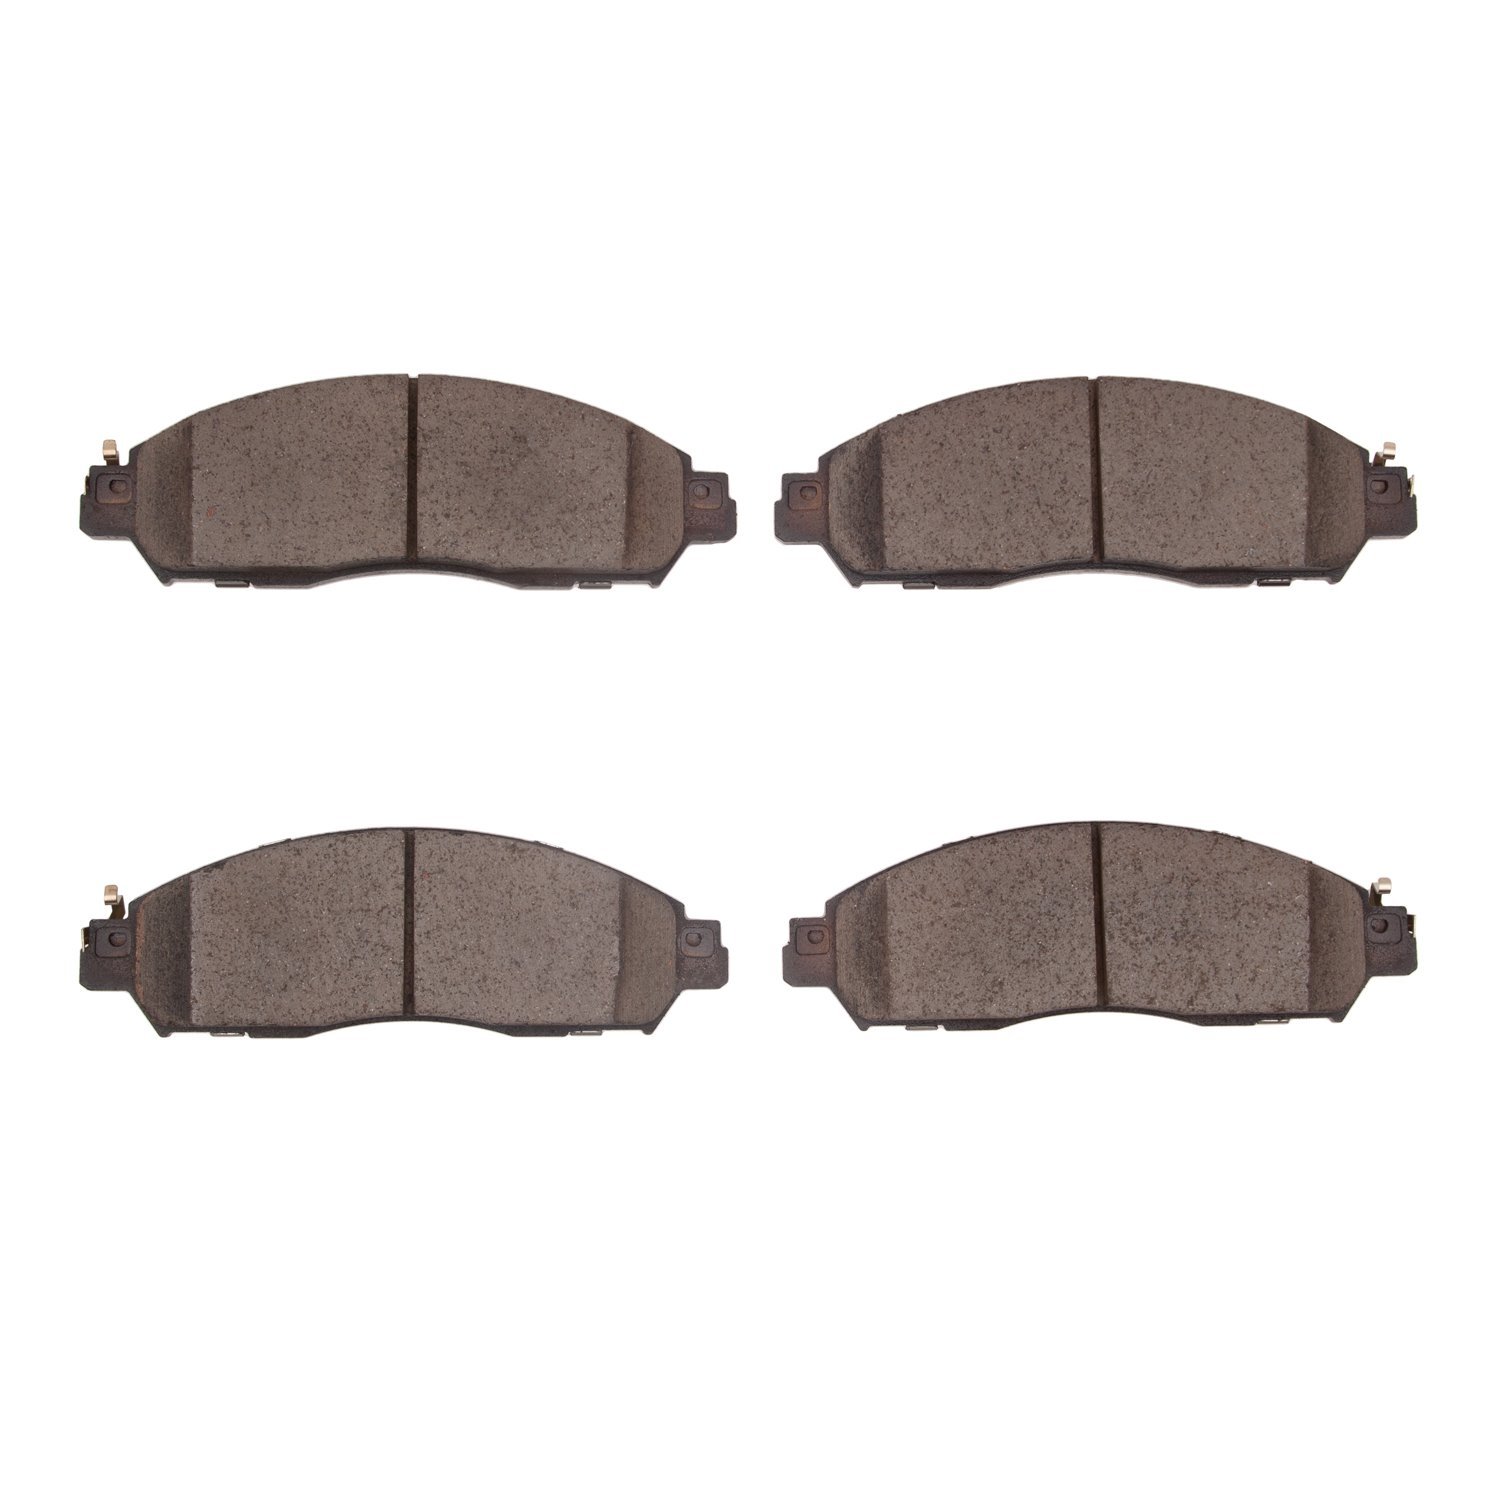 Ceramic Brake Pads, Fits Select Infiniti/Nissan, Position: Front